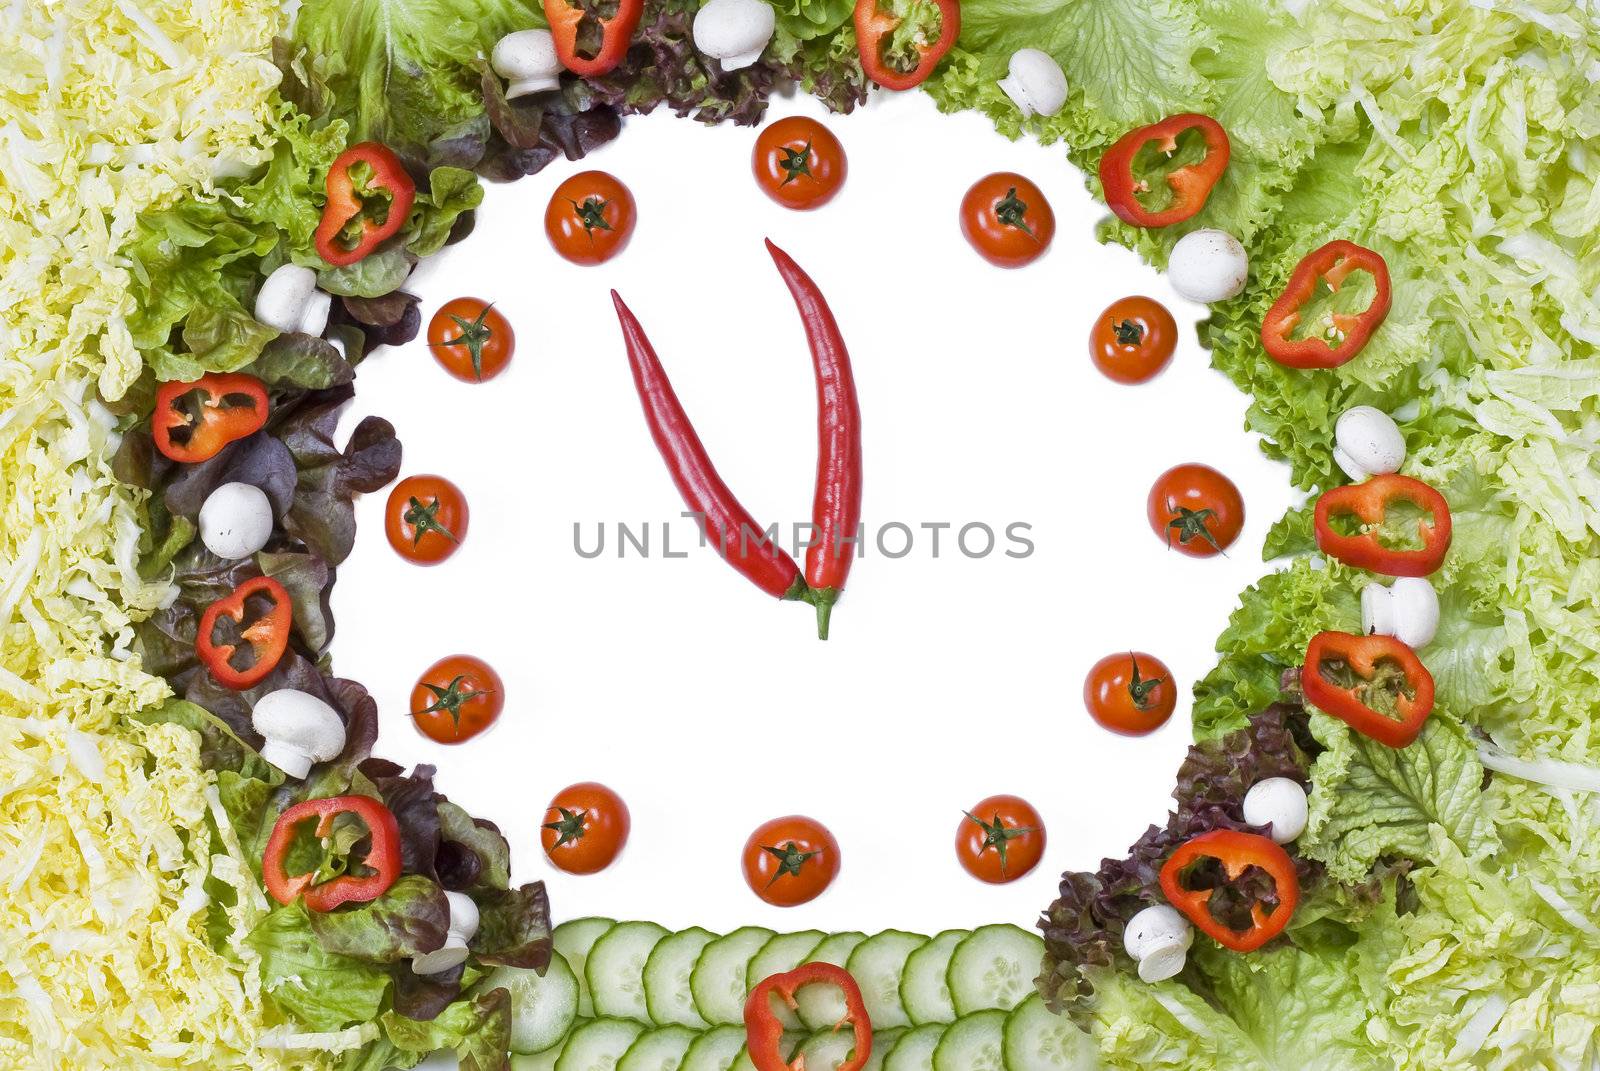 Vegetable clock created on white background from fresh vegetables